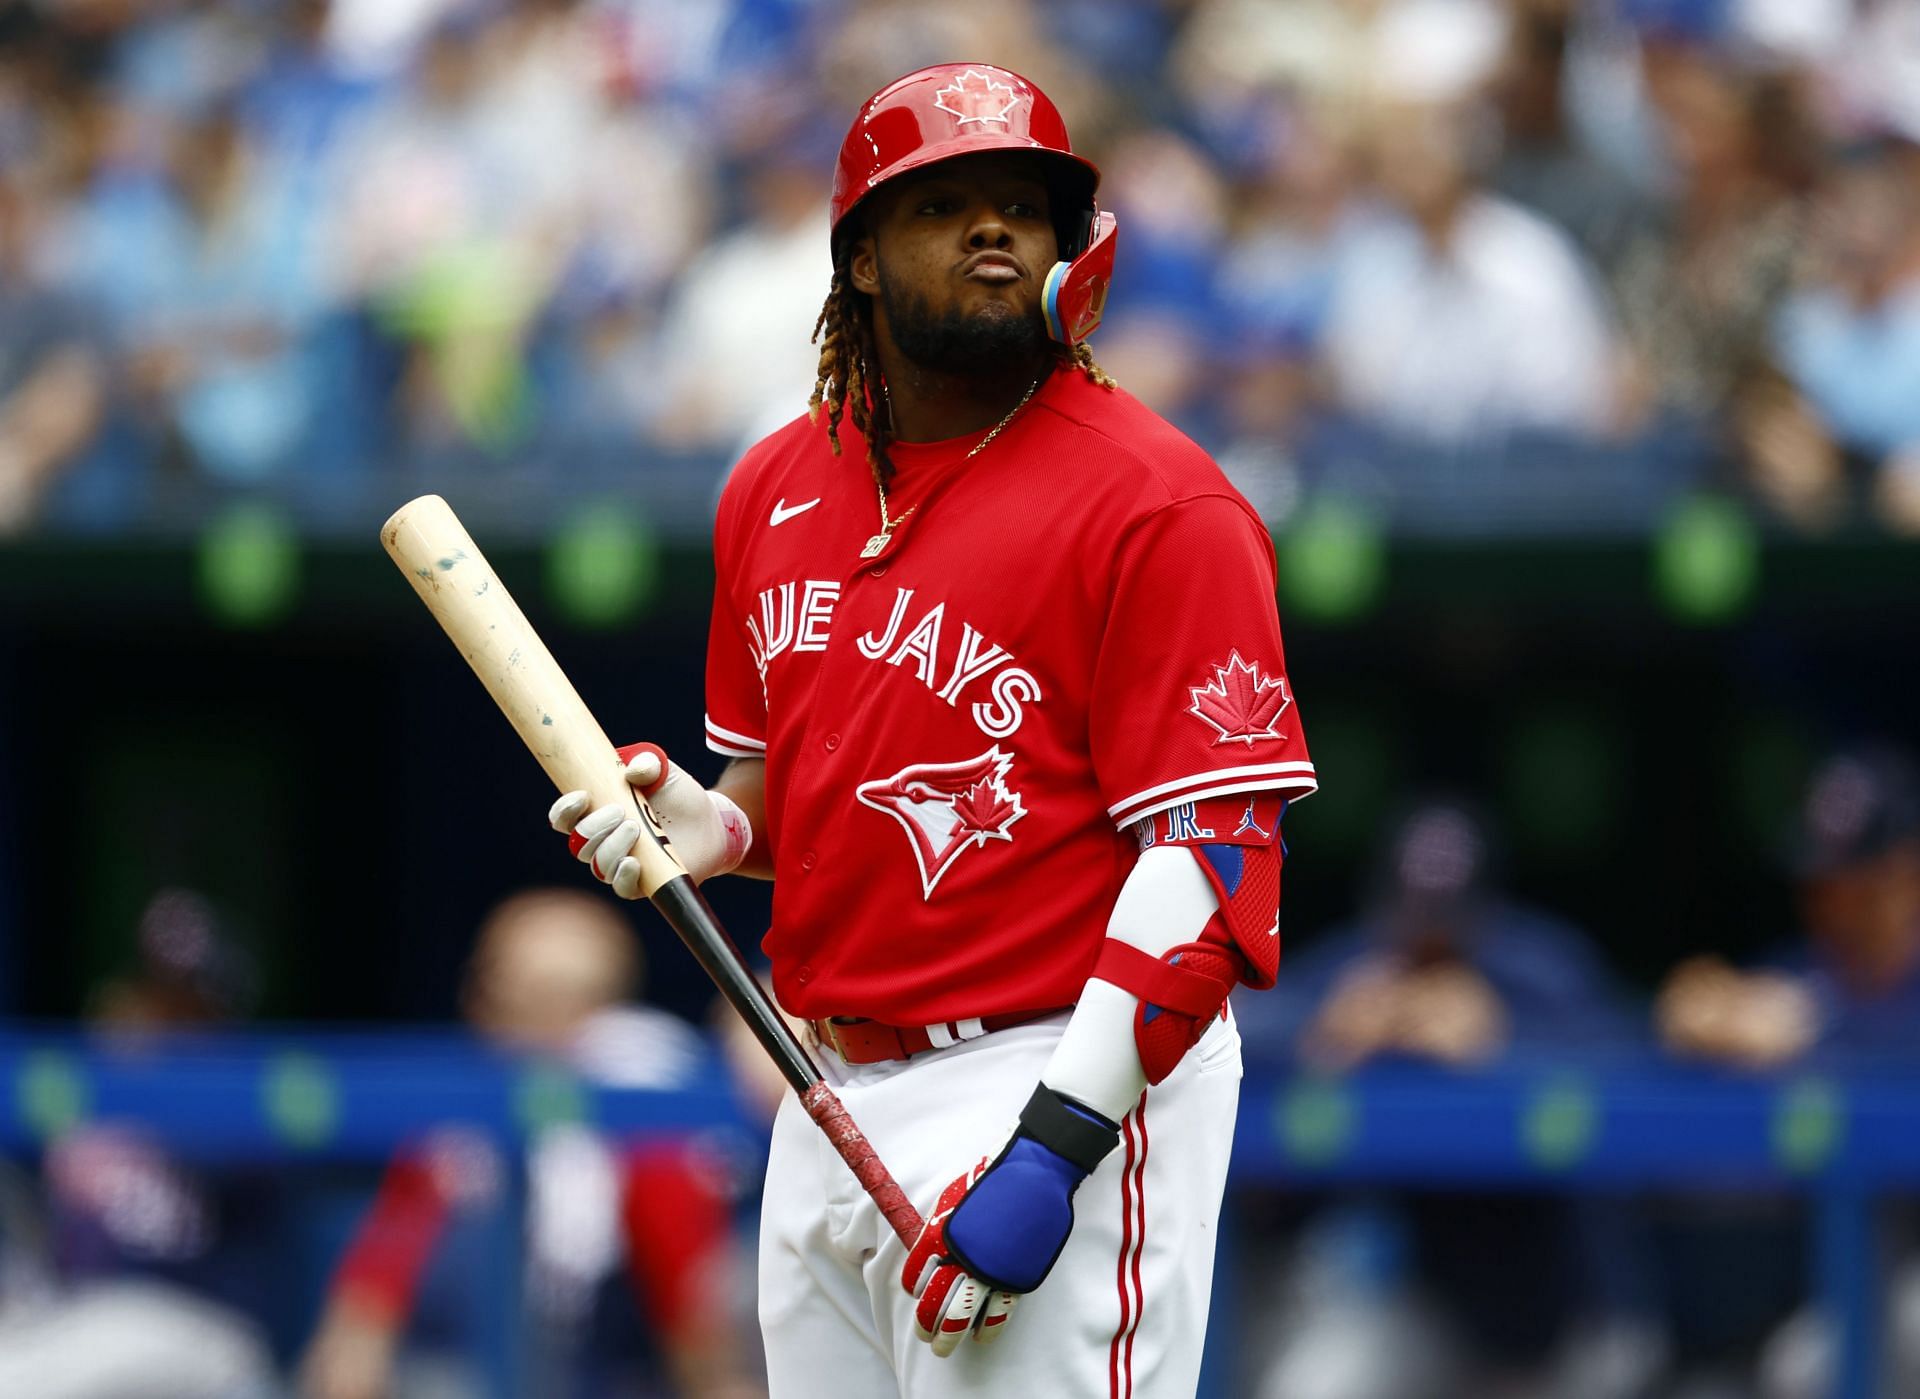 Sports Illustrated - LIKE FATHER, LIKE SON 💙 Vladimir Guerrero Sr. homered  in the 2006 MLB All-Star Game Vladimir Guerrero Jr. homered in the 2021 MLB  All-Star Game